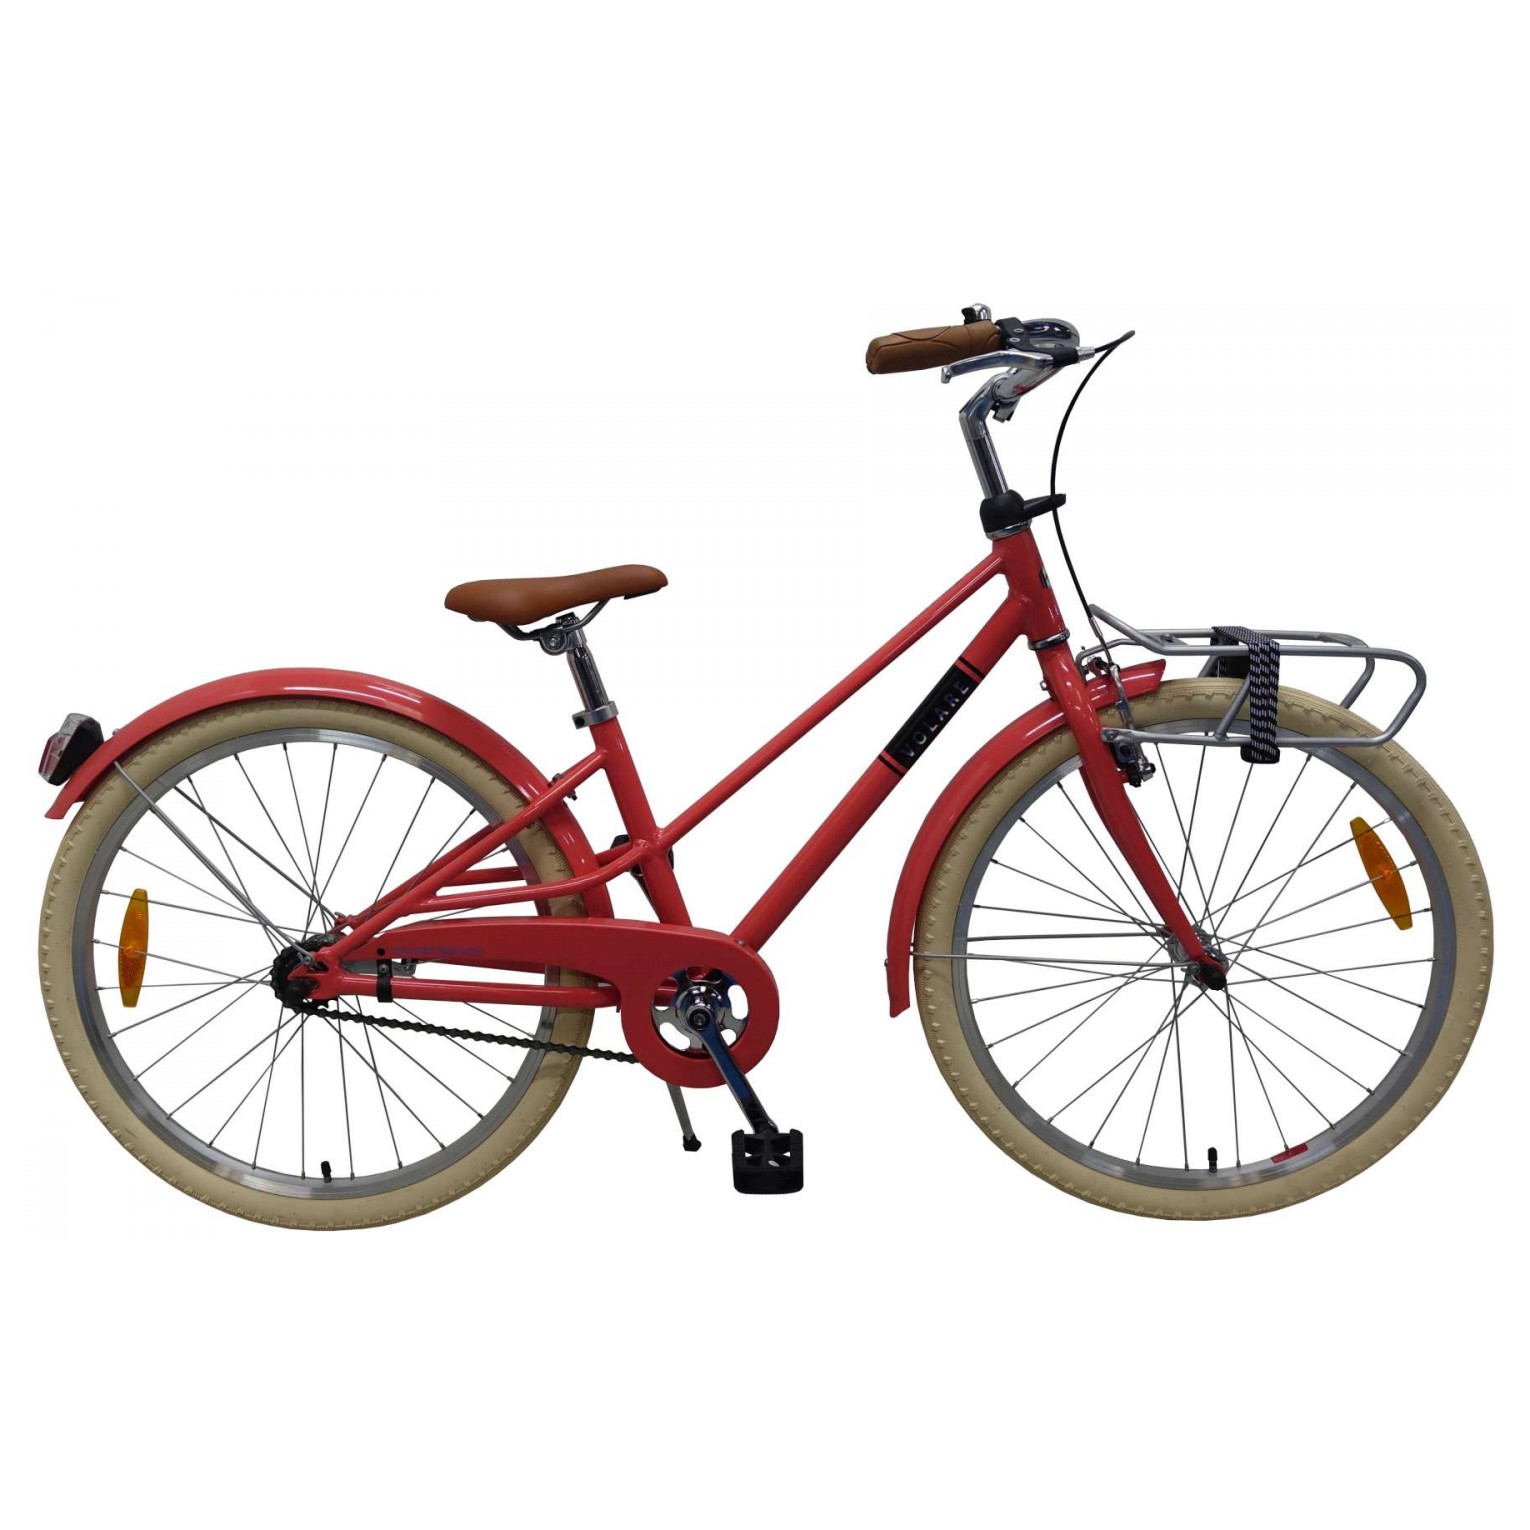 Volare Melody Fiets - 24 inch - Pastel Rood